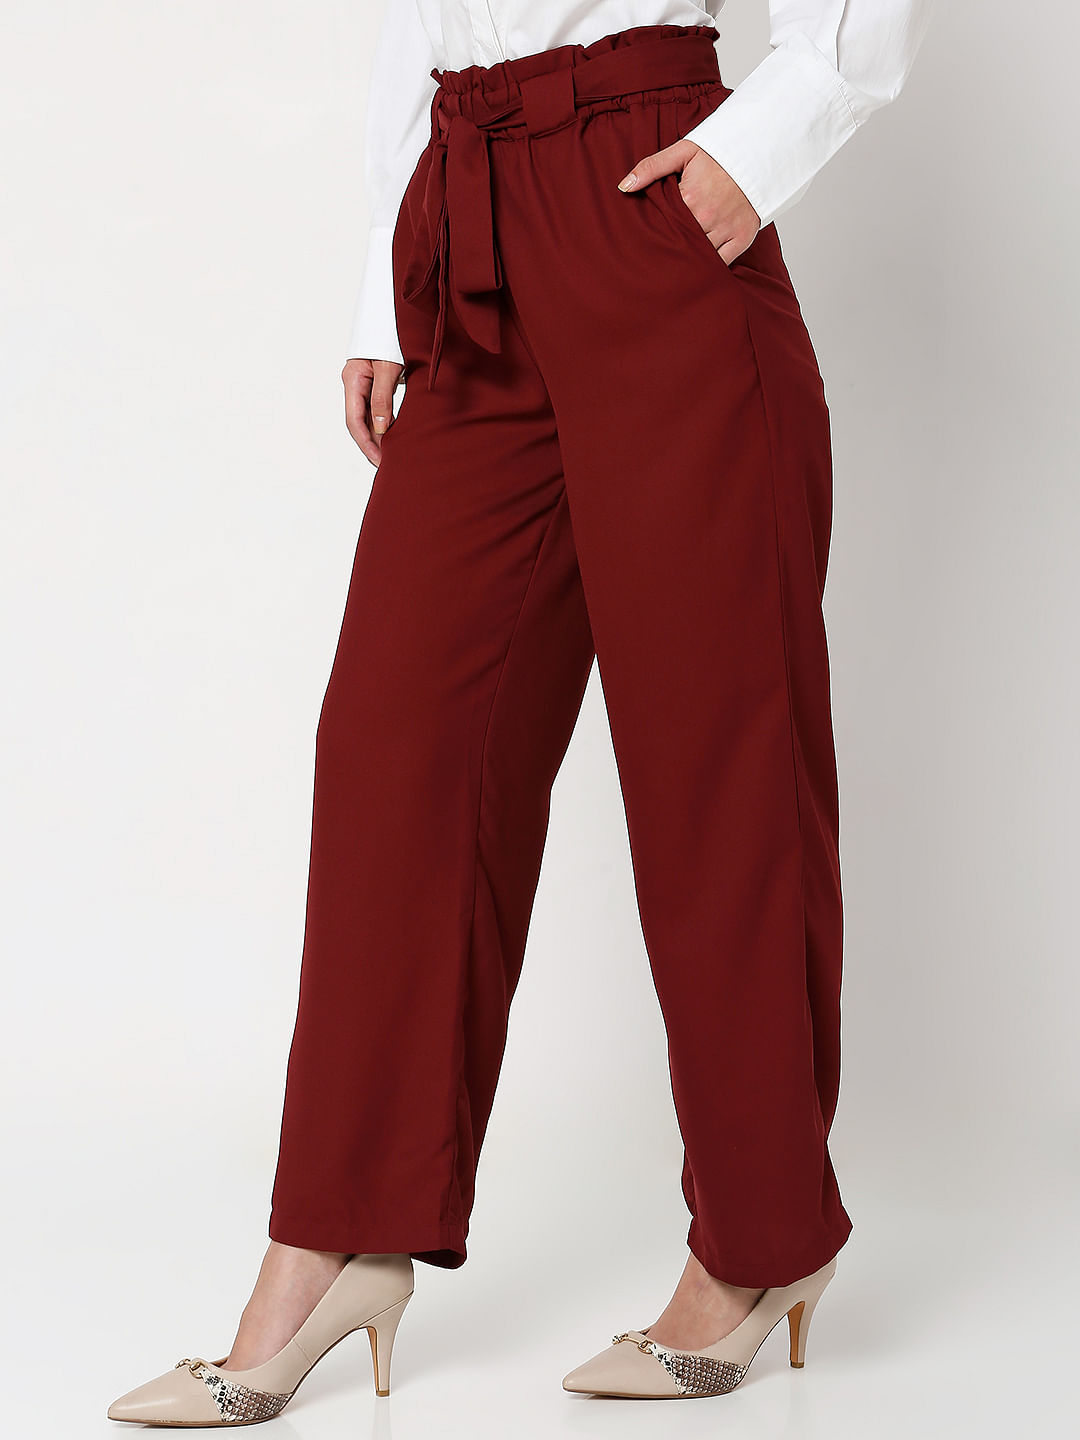 Buy KRAUS High-Rise Joggers Comfort fit Women's Pants | Shoppers Stop